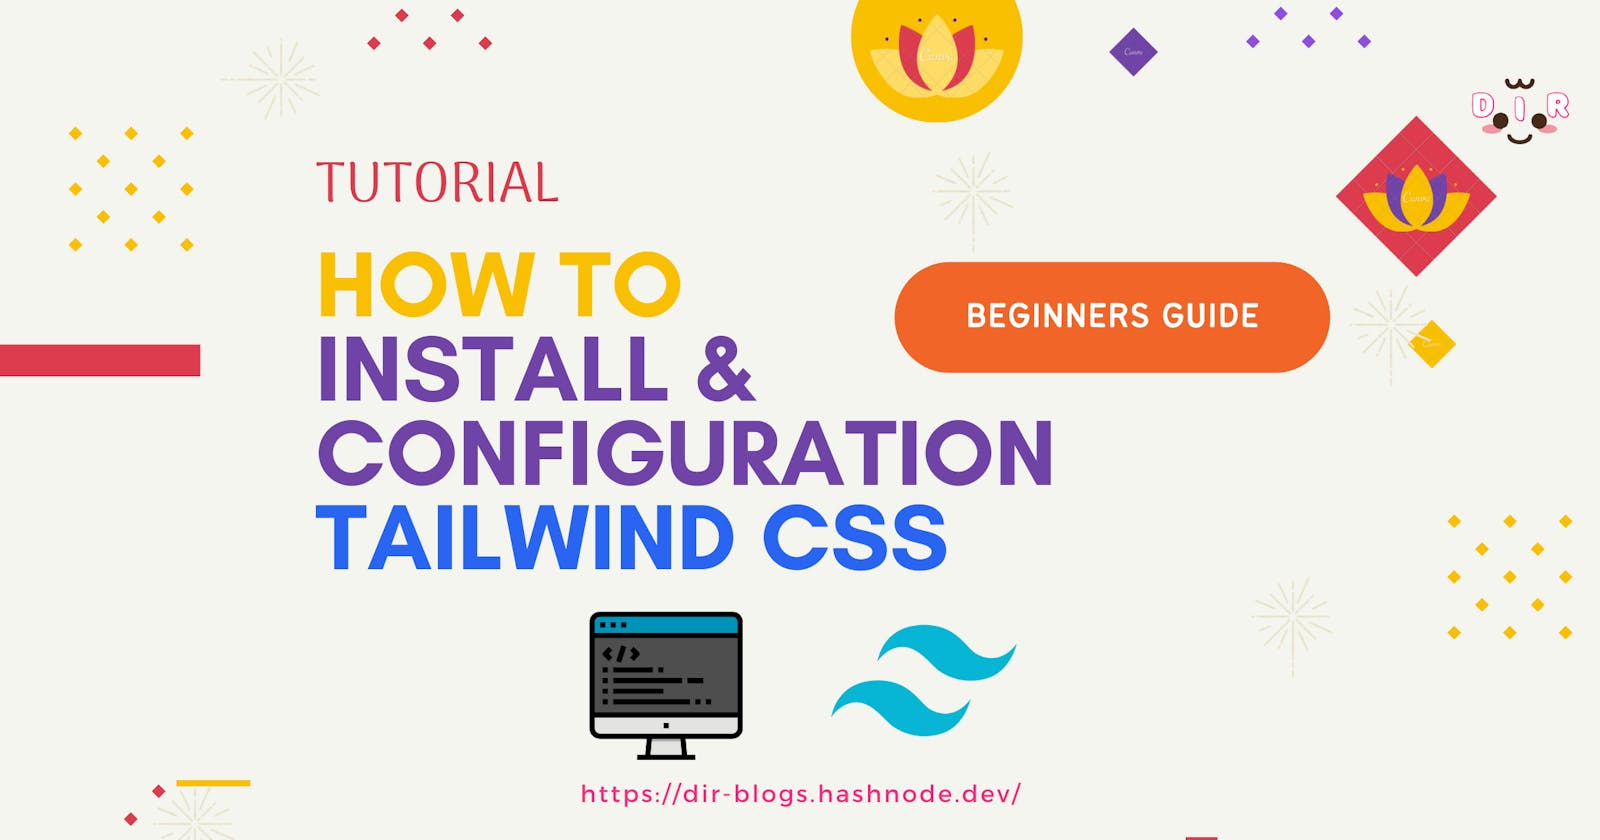 How to Install & Configuration Tailwind CSS | Beginners Guide